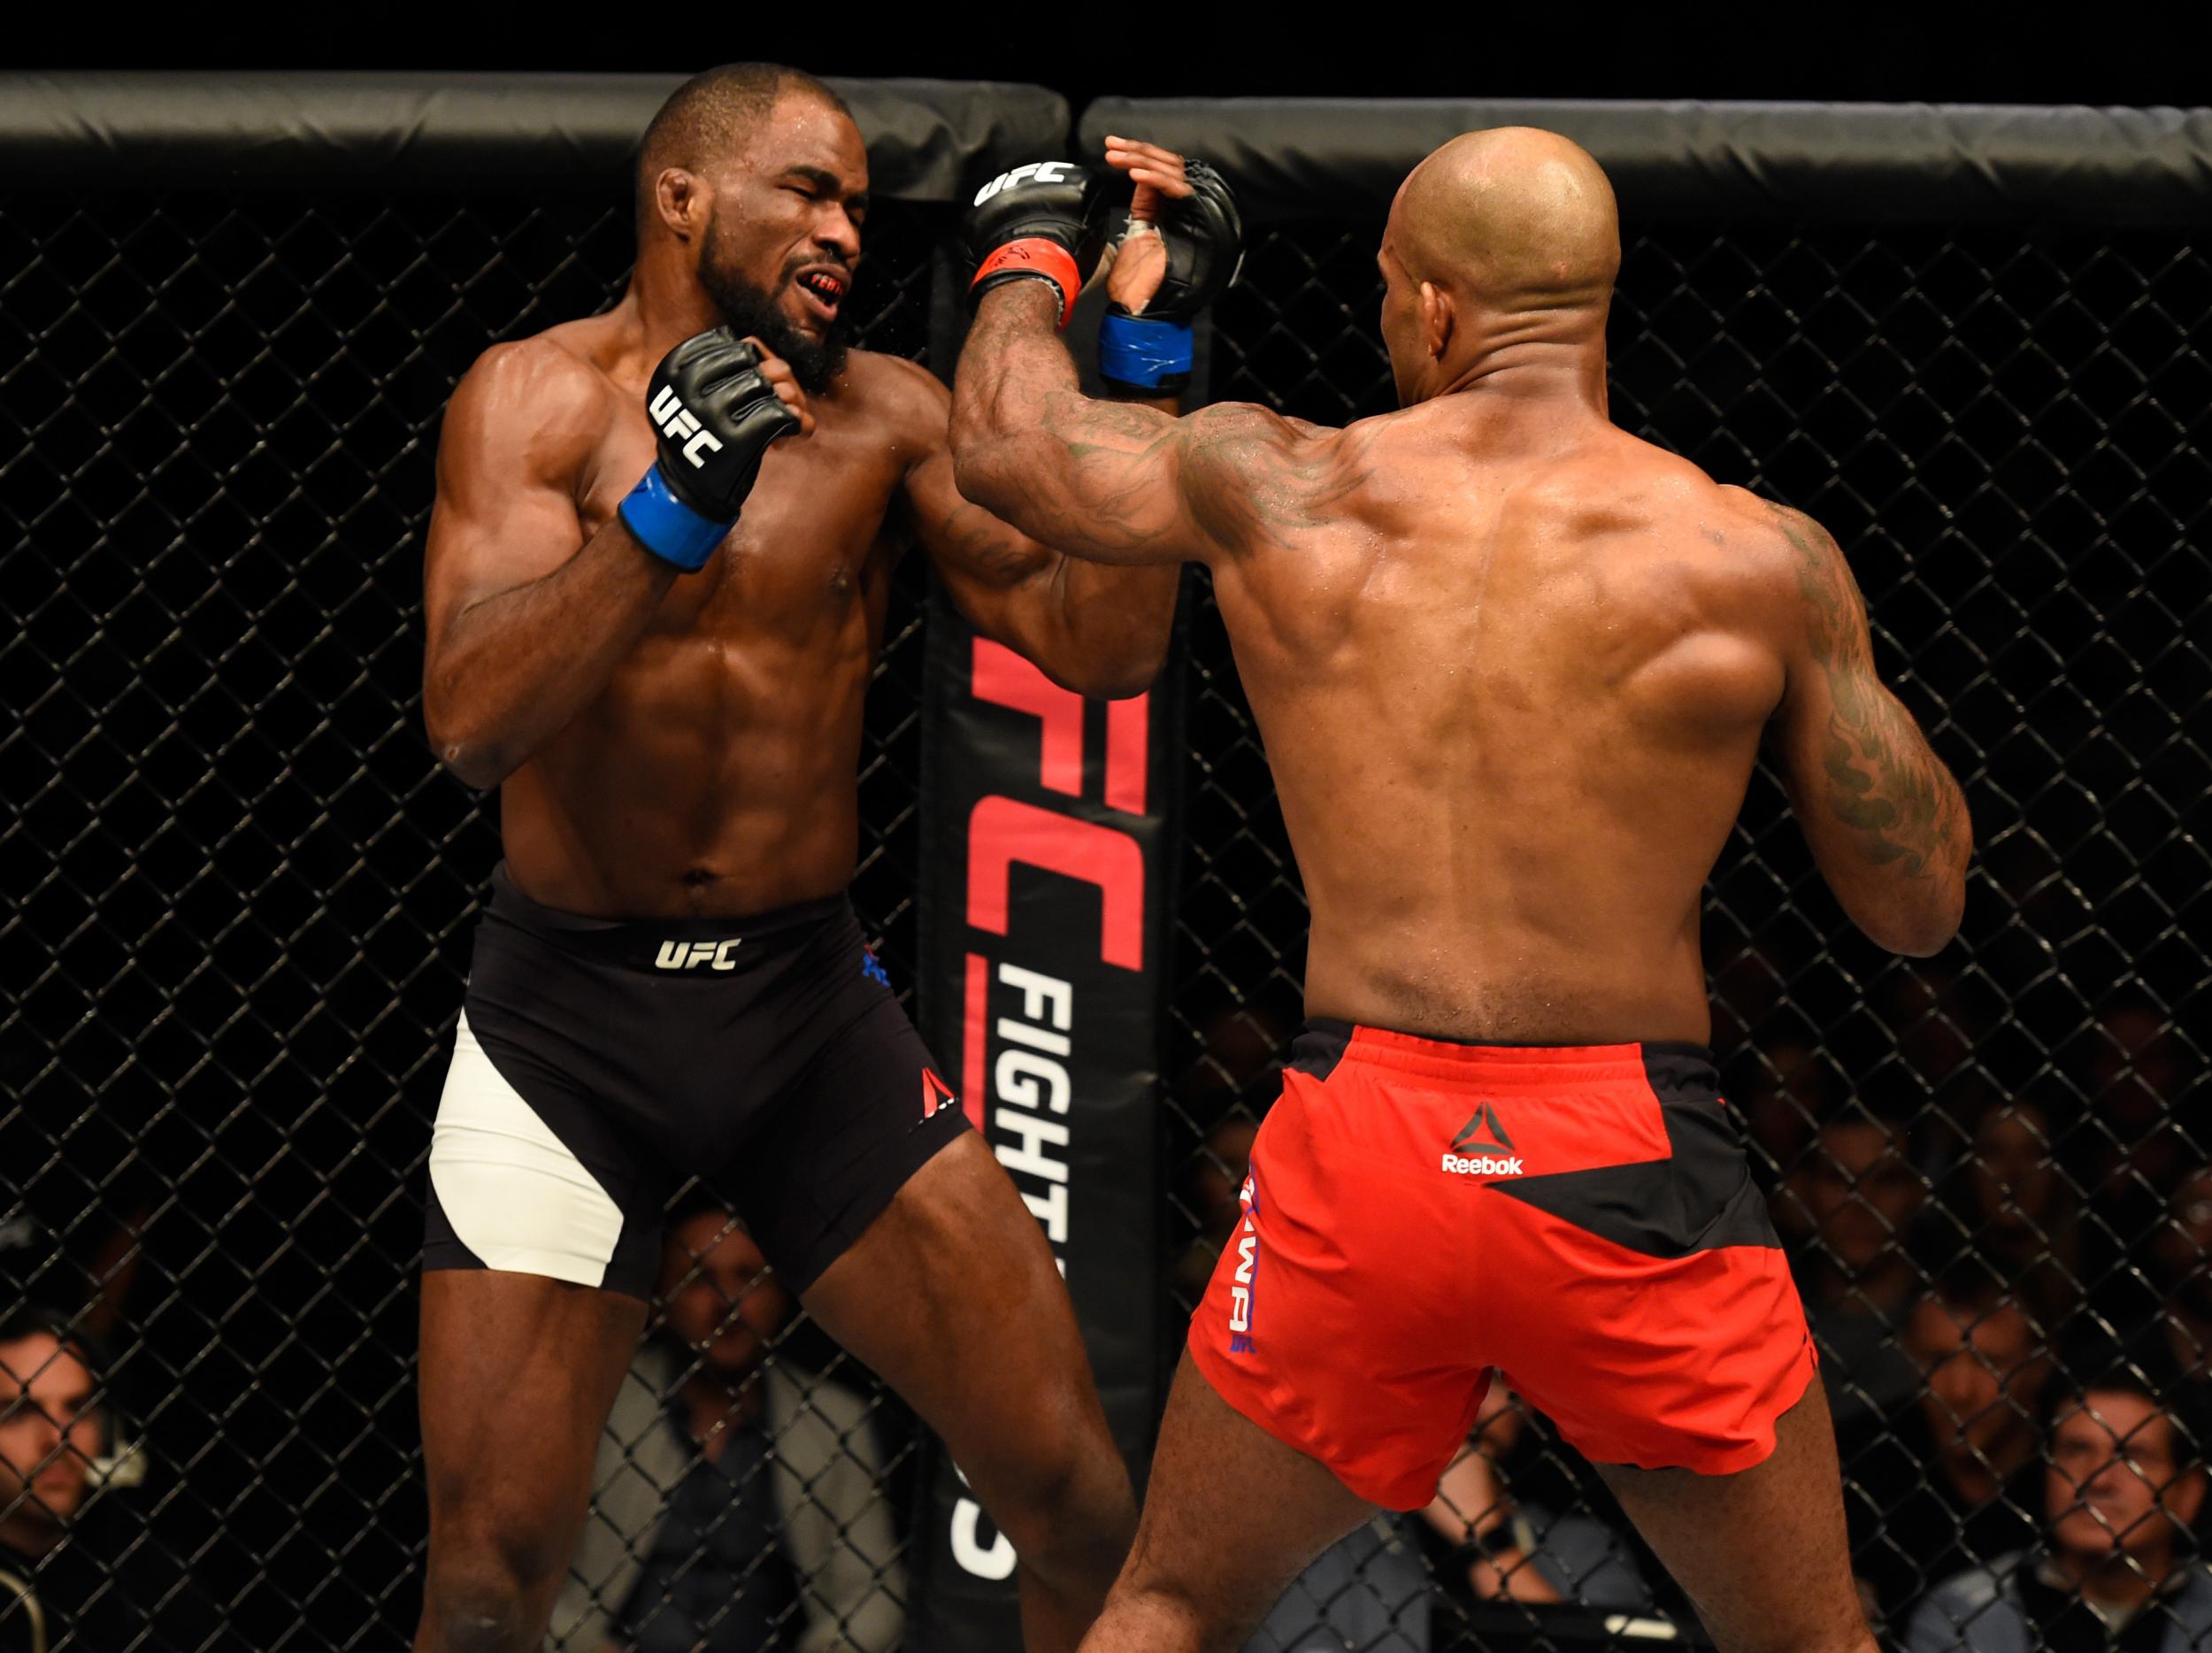 Manuwa made light work of Anderson at the O2 in 2017